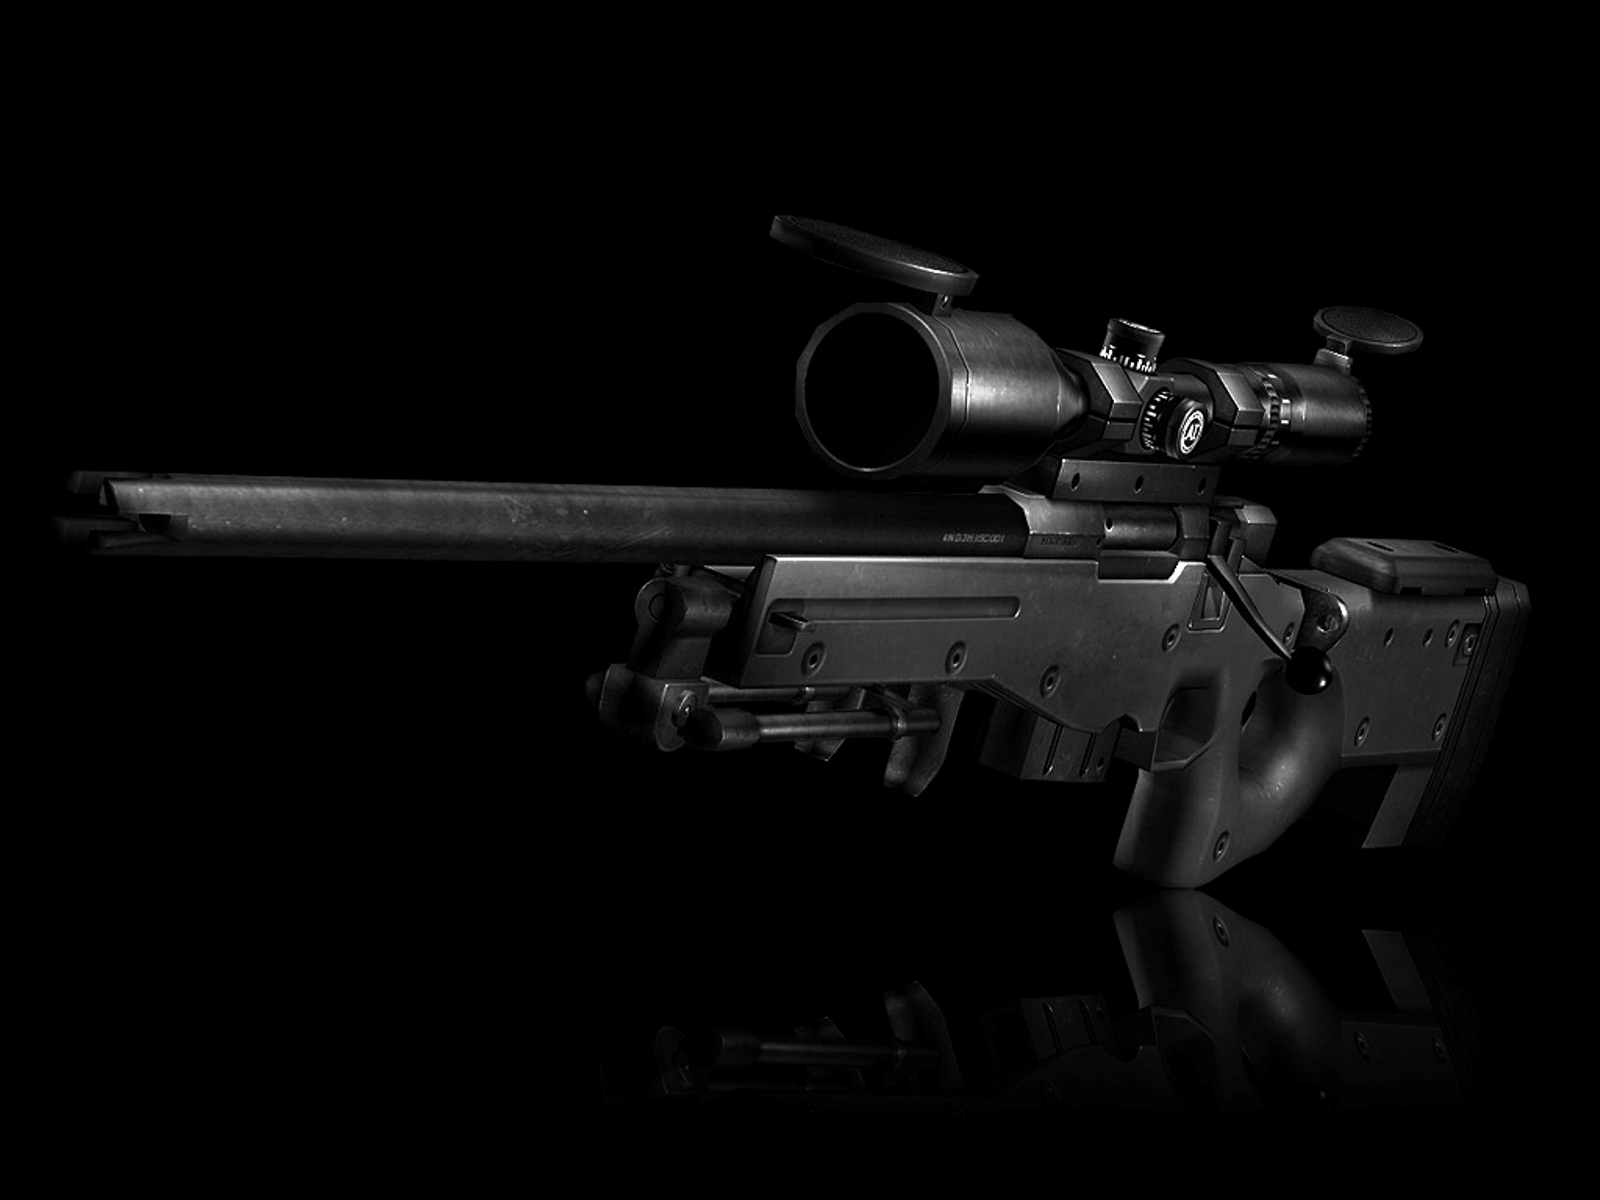 Sniper rifle s for desktop download free sniper rifle pictures and backgrounds for pc